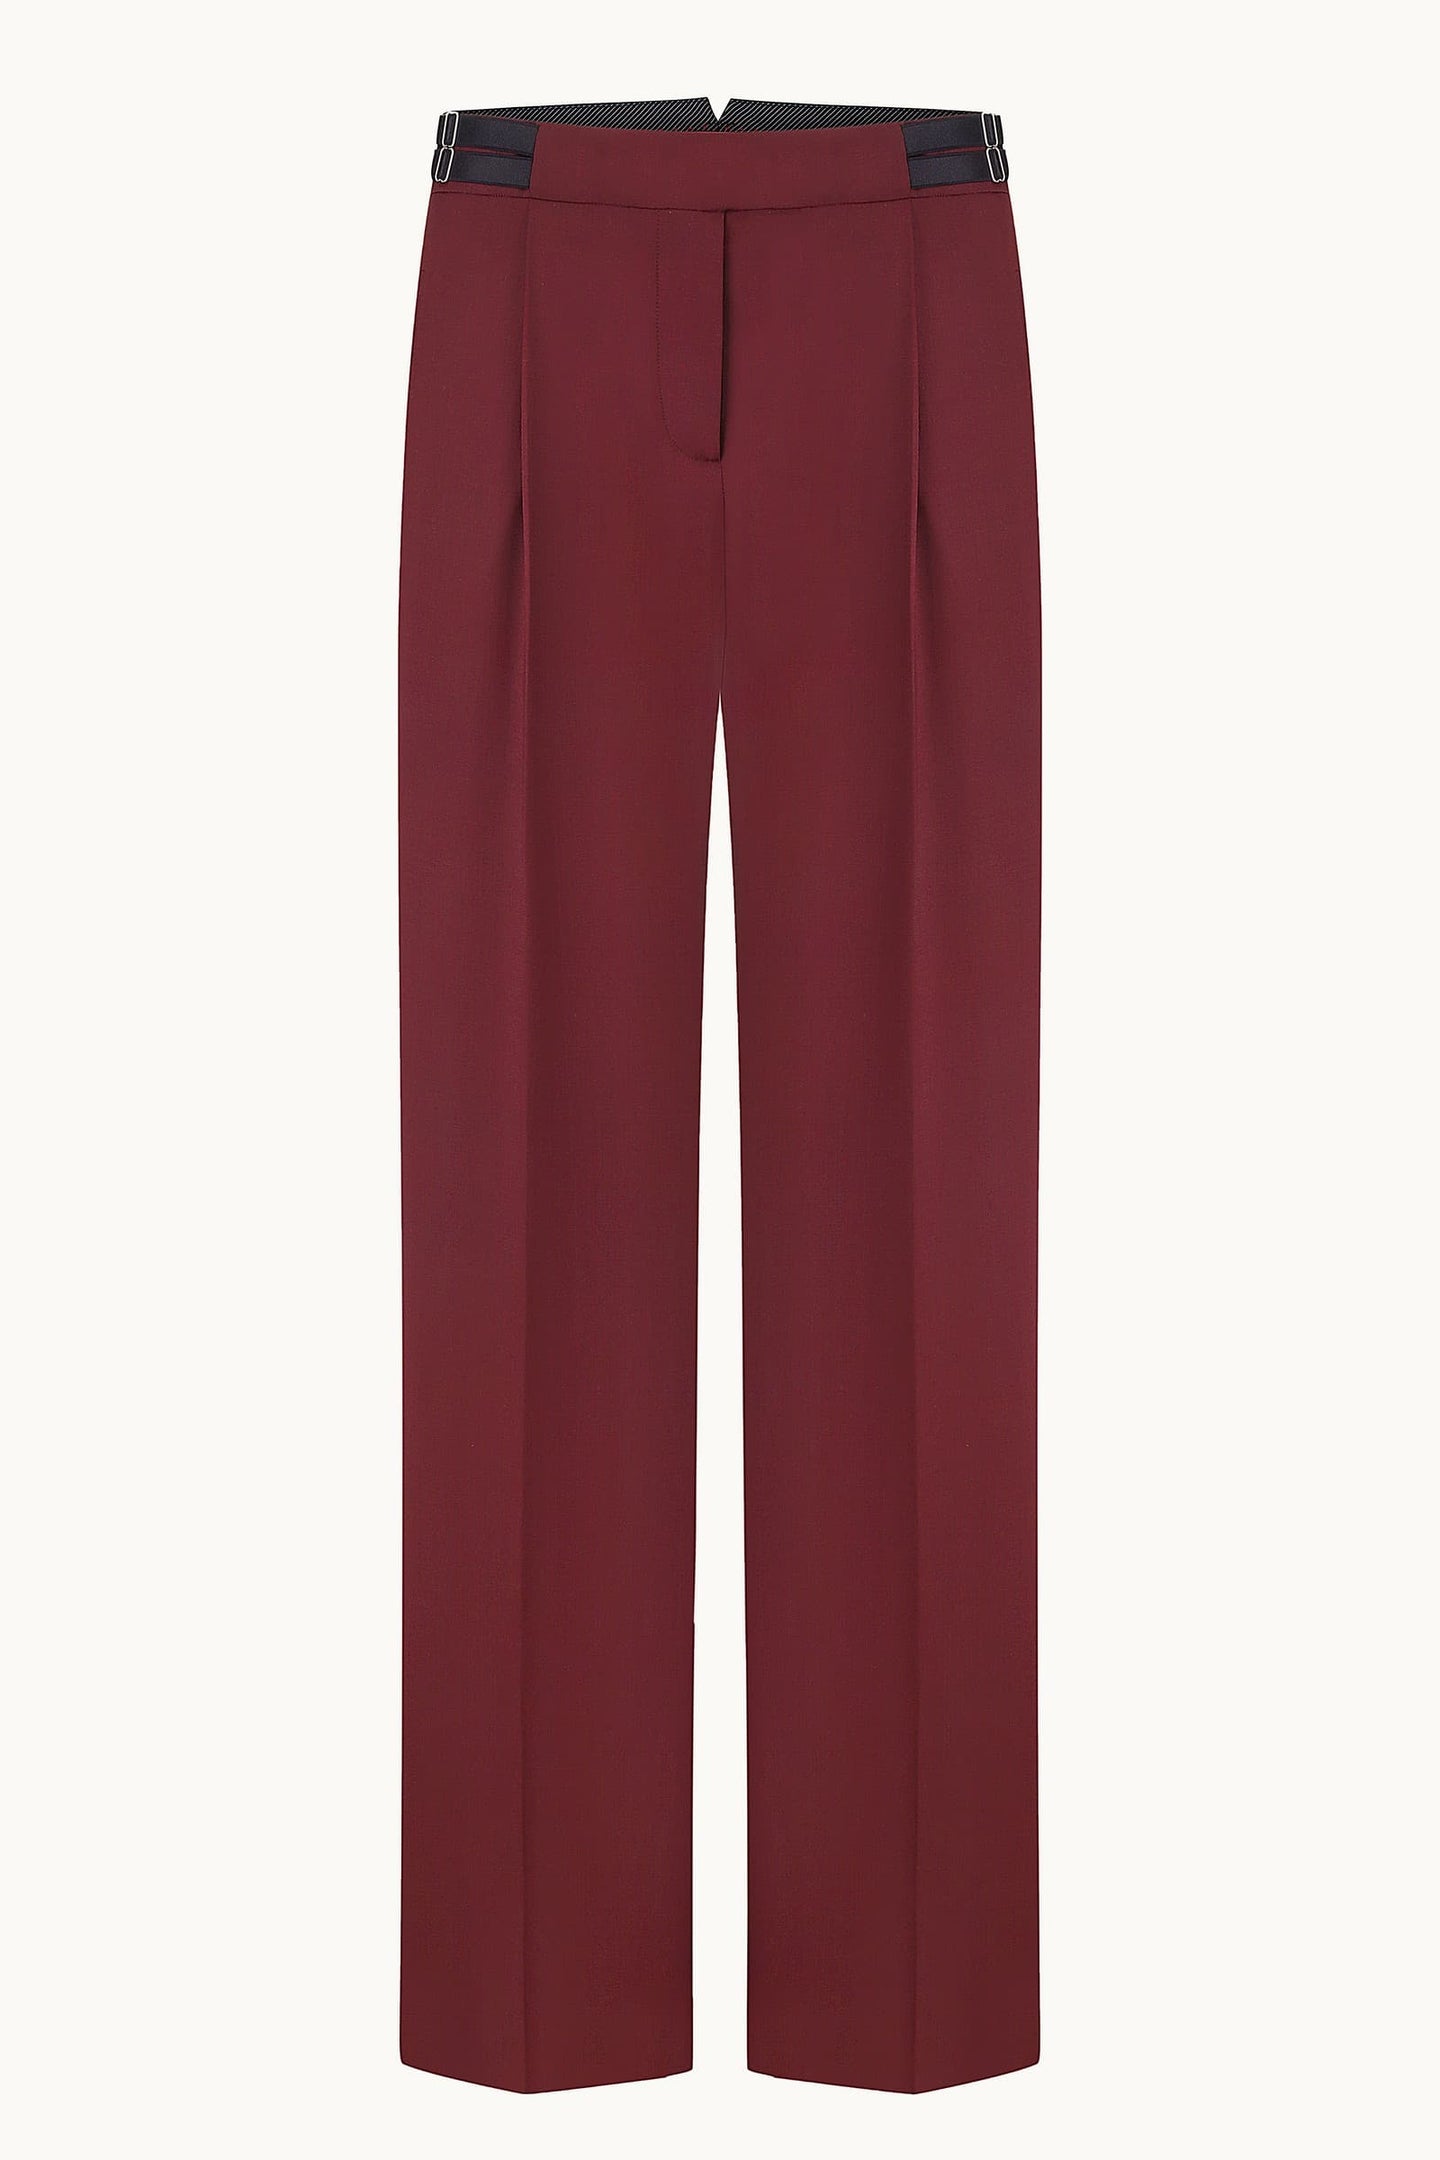 Nora burgundy pants front view